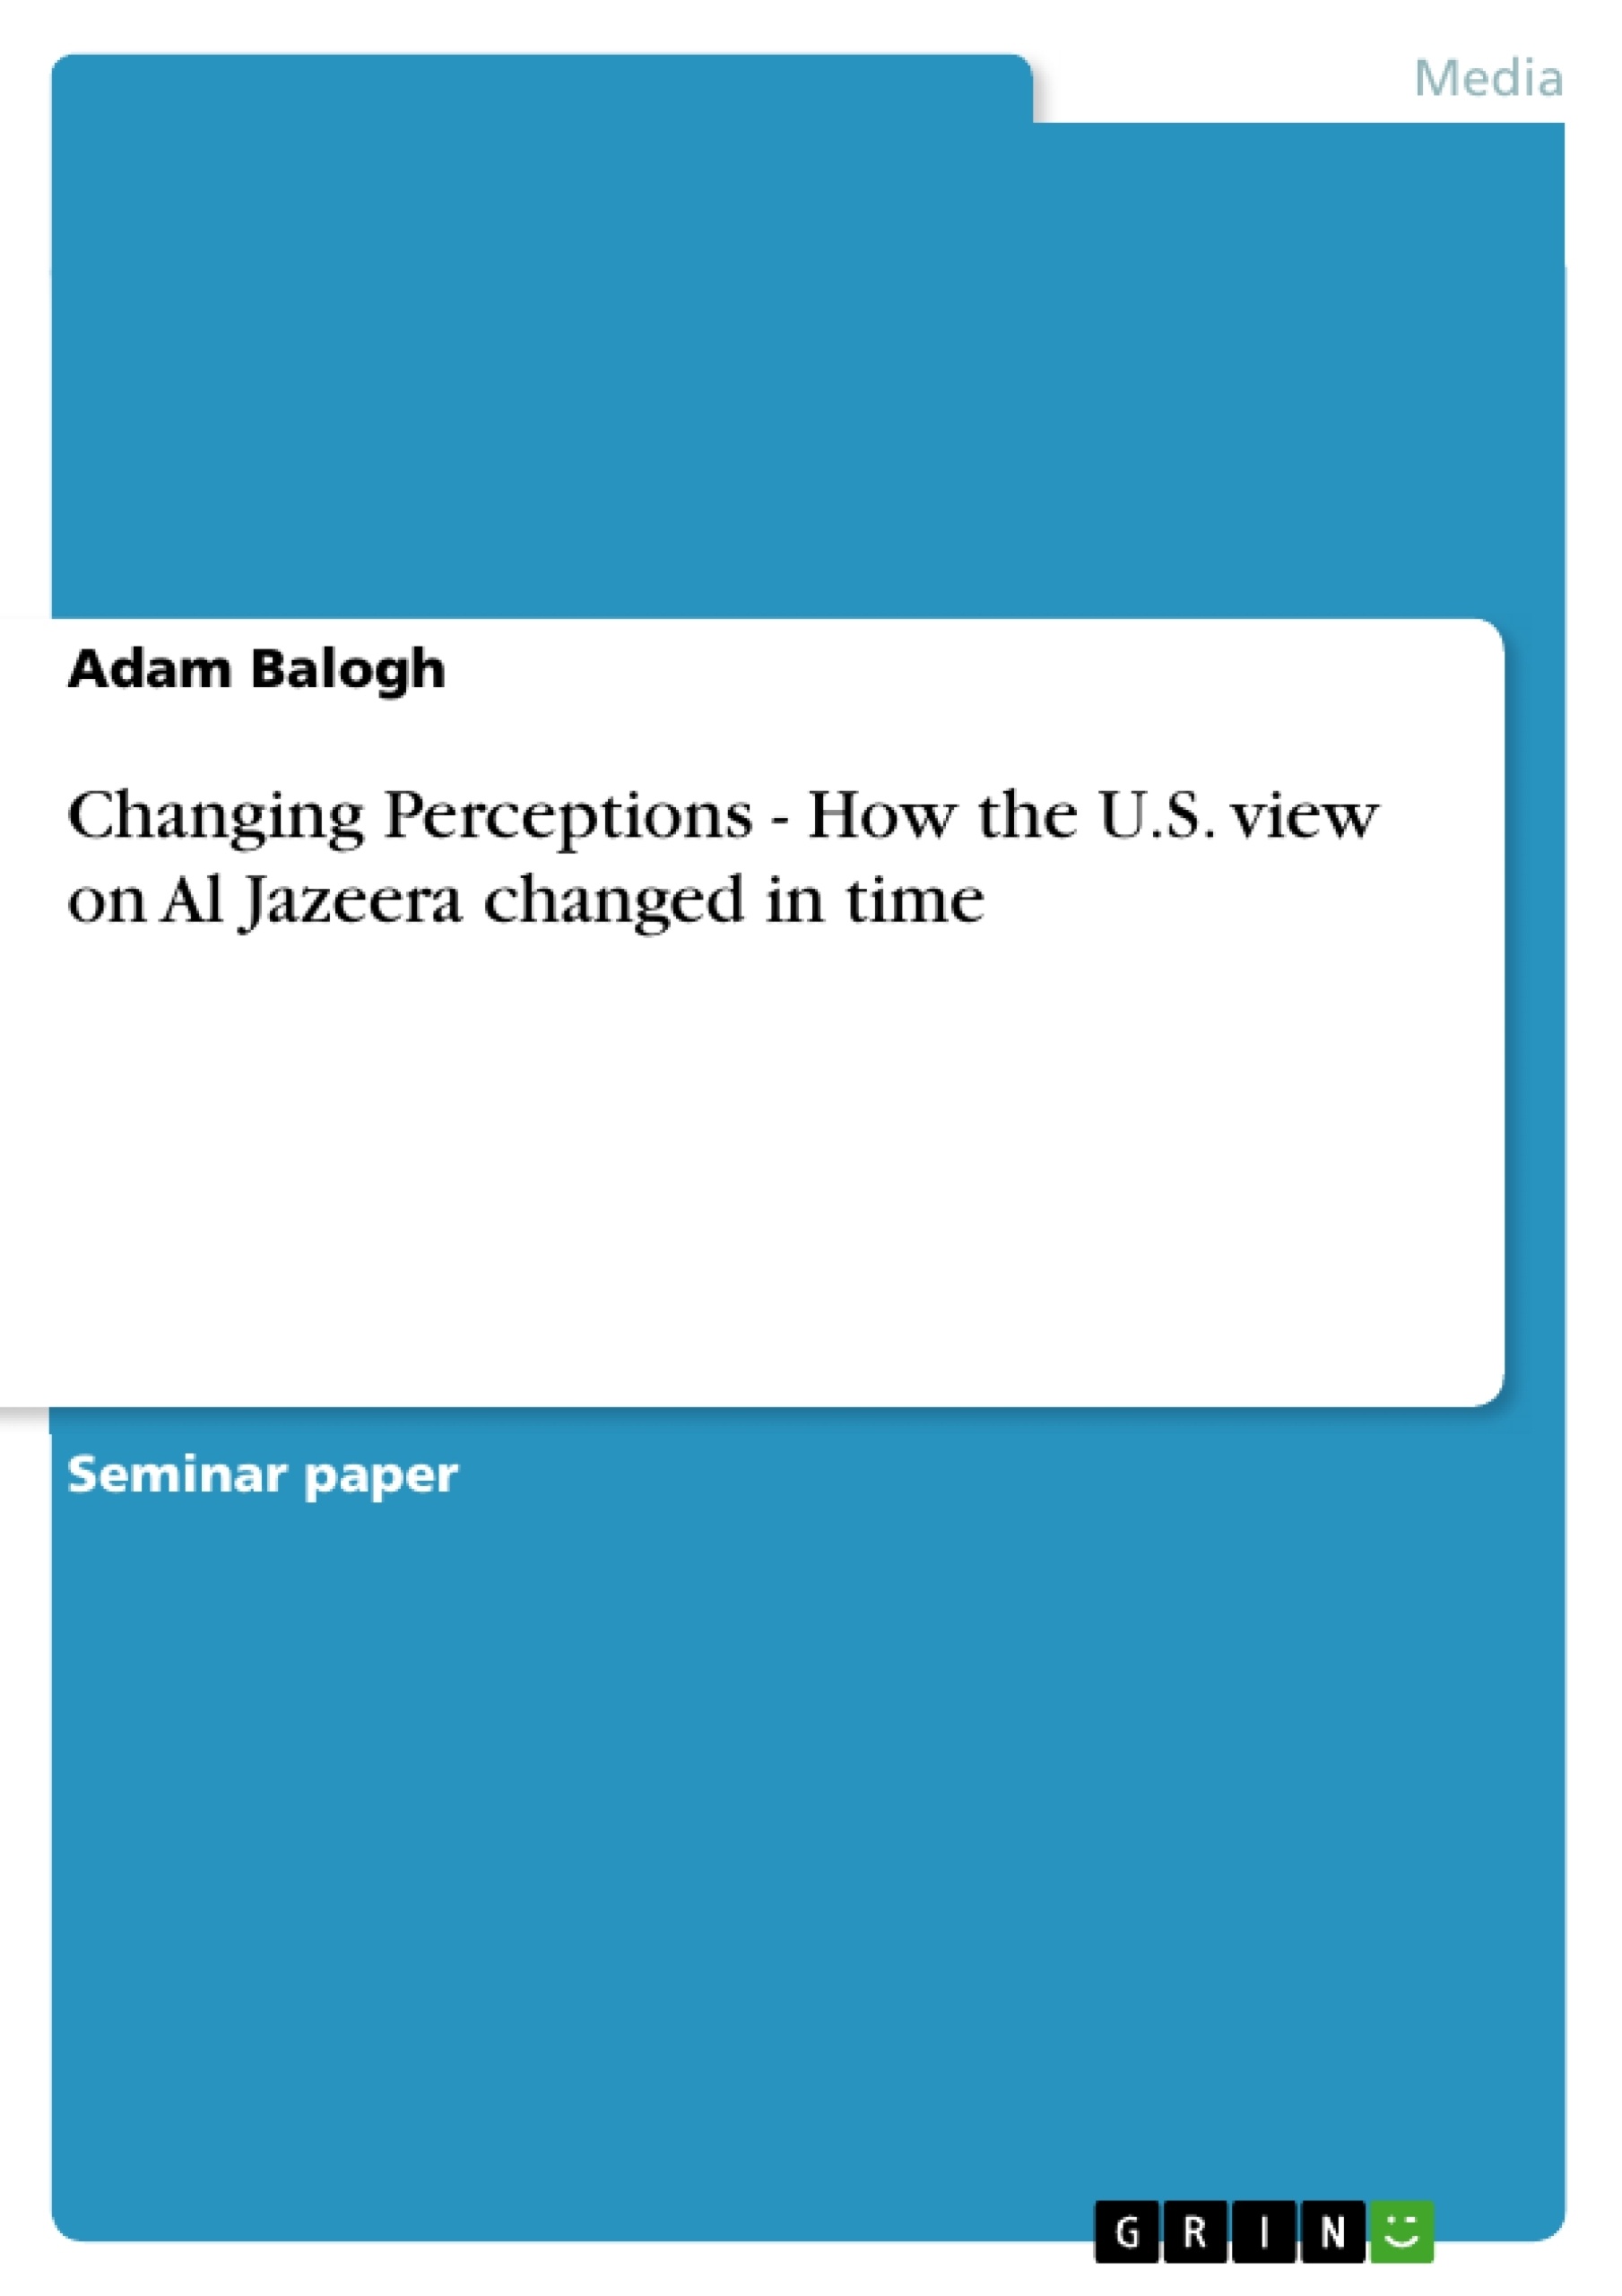 Title: Changing Perceptions - How the U.S. view on Al Jazeera changed in time